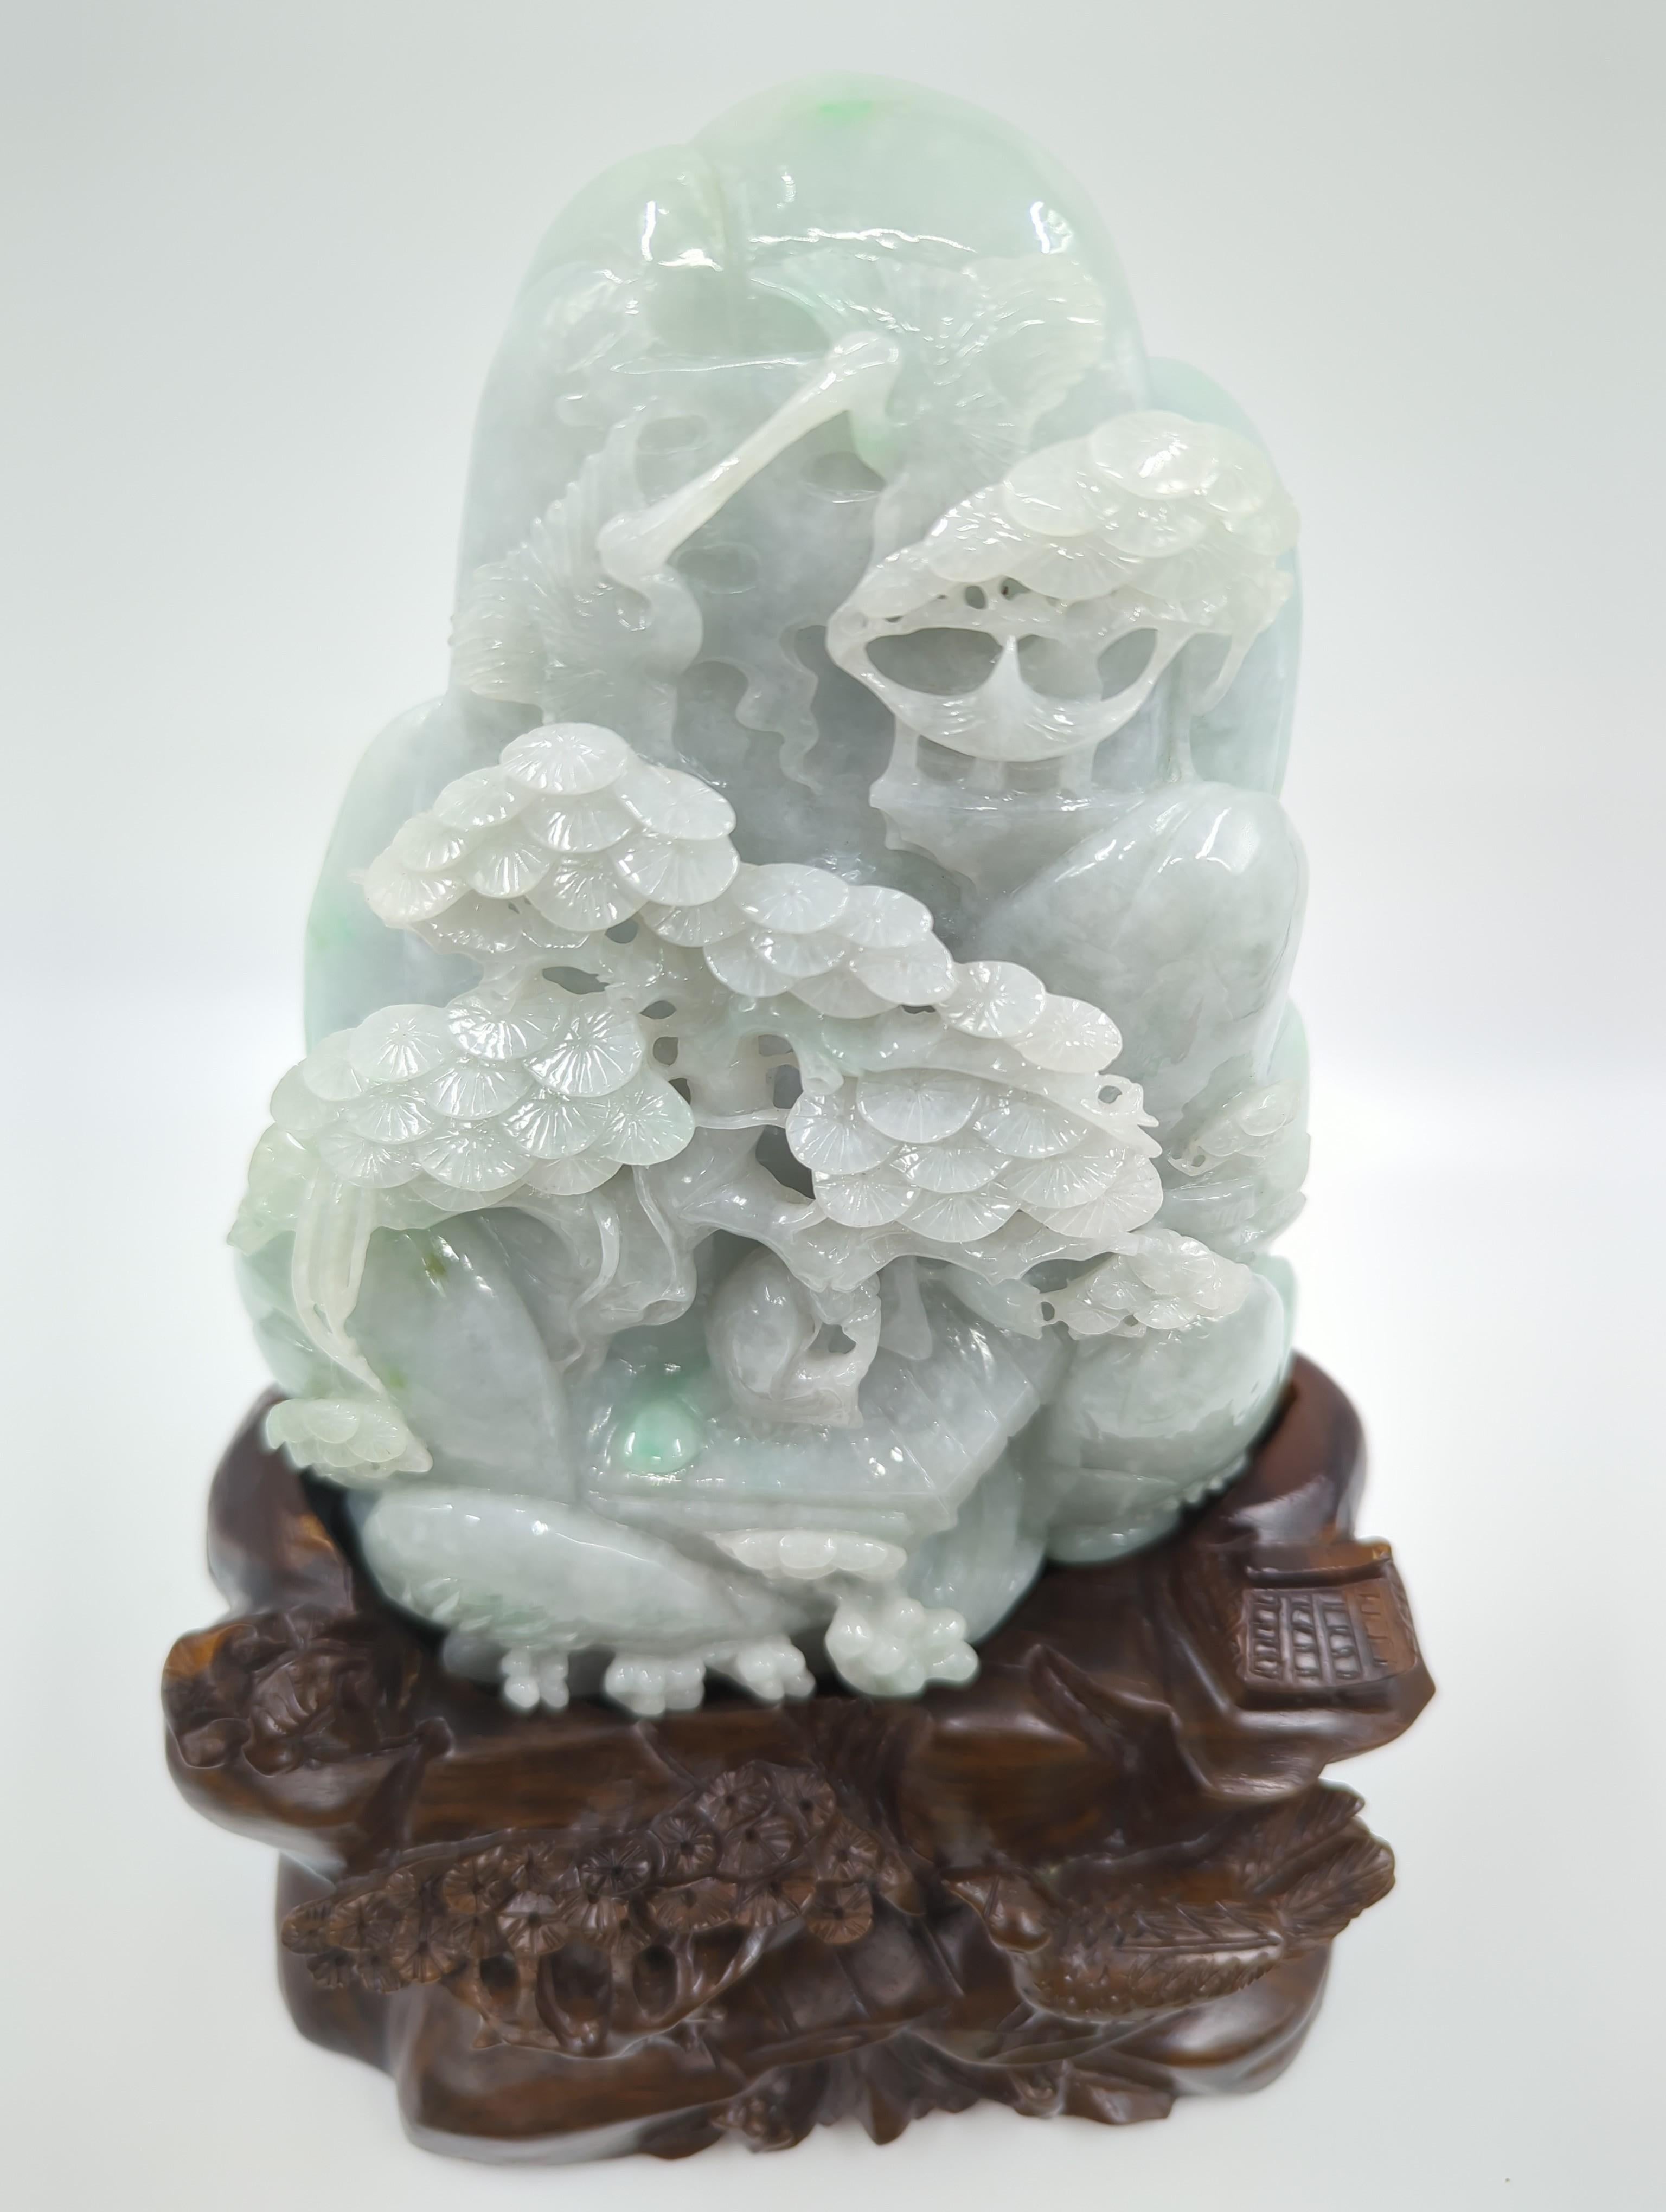 This modern Chinese jadeite mountain, standing at an impressive 18 inches on its stand, is a remarkable piece of artistry, showcasing the exquisite craftsmanship associated with contemporary Chinese jade carving. The highly polished carving depicts